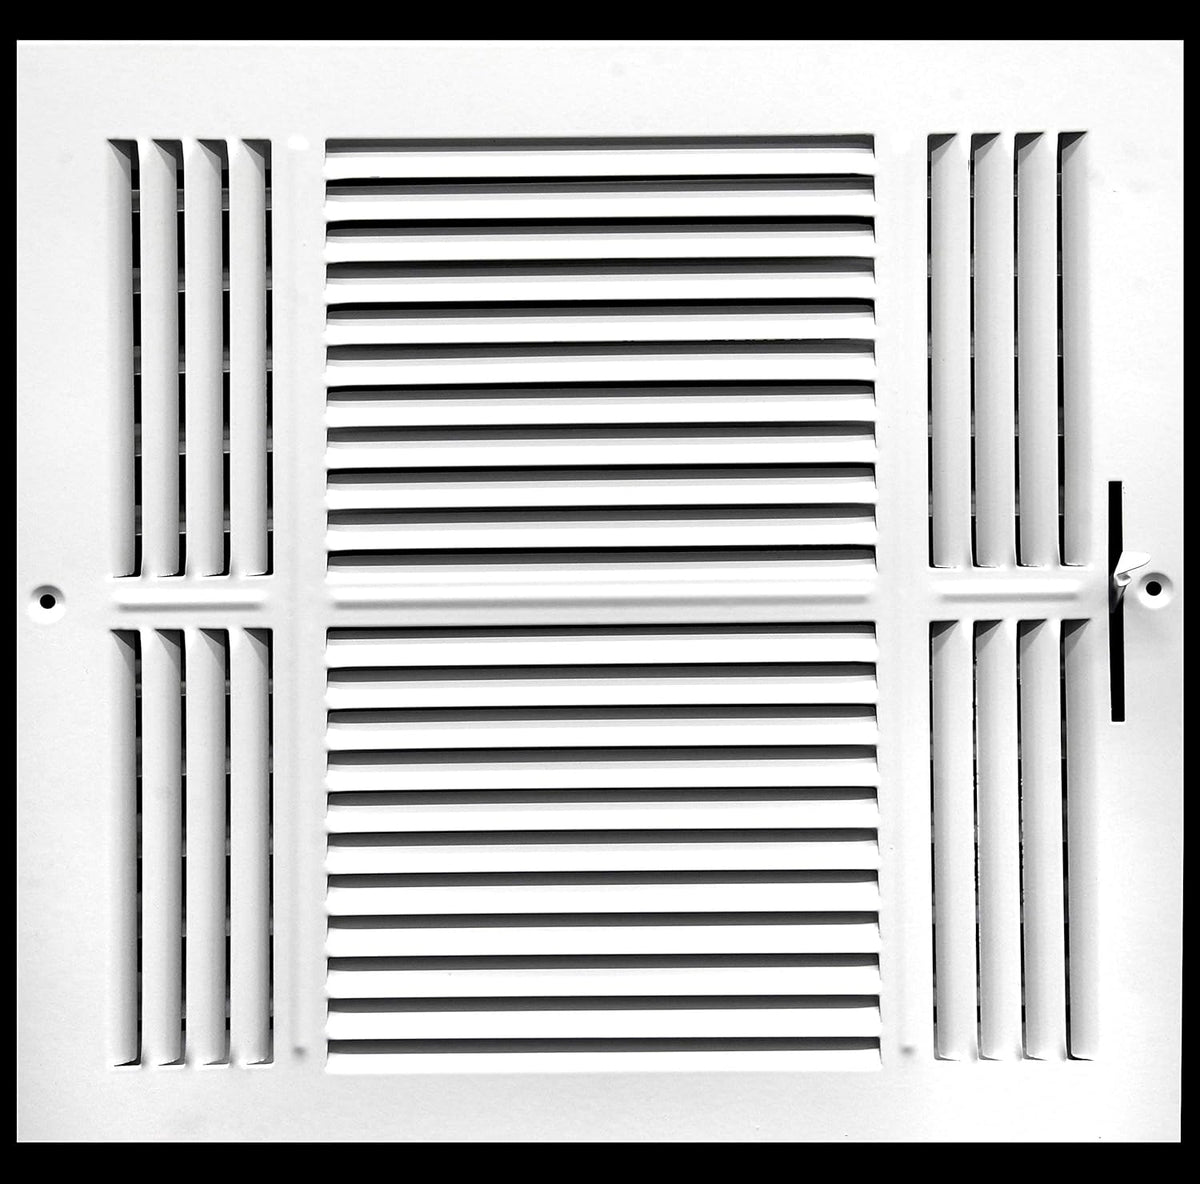 12&quot;w X 12&quot;h 3-Way AIR SUPPLY GRILLE - DUCT COVER &amp; DIFFUSER - Flat Stamped Face - White [Outer Dimensions: 13.75&quot;w X 13.75&quot;h]